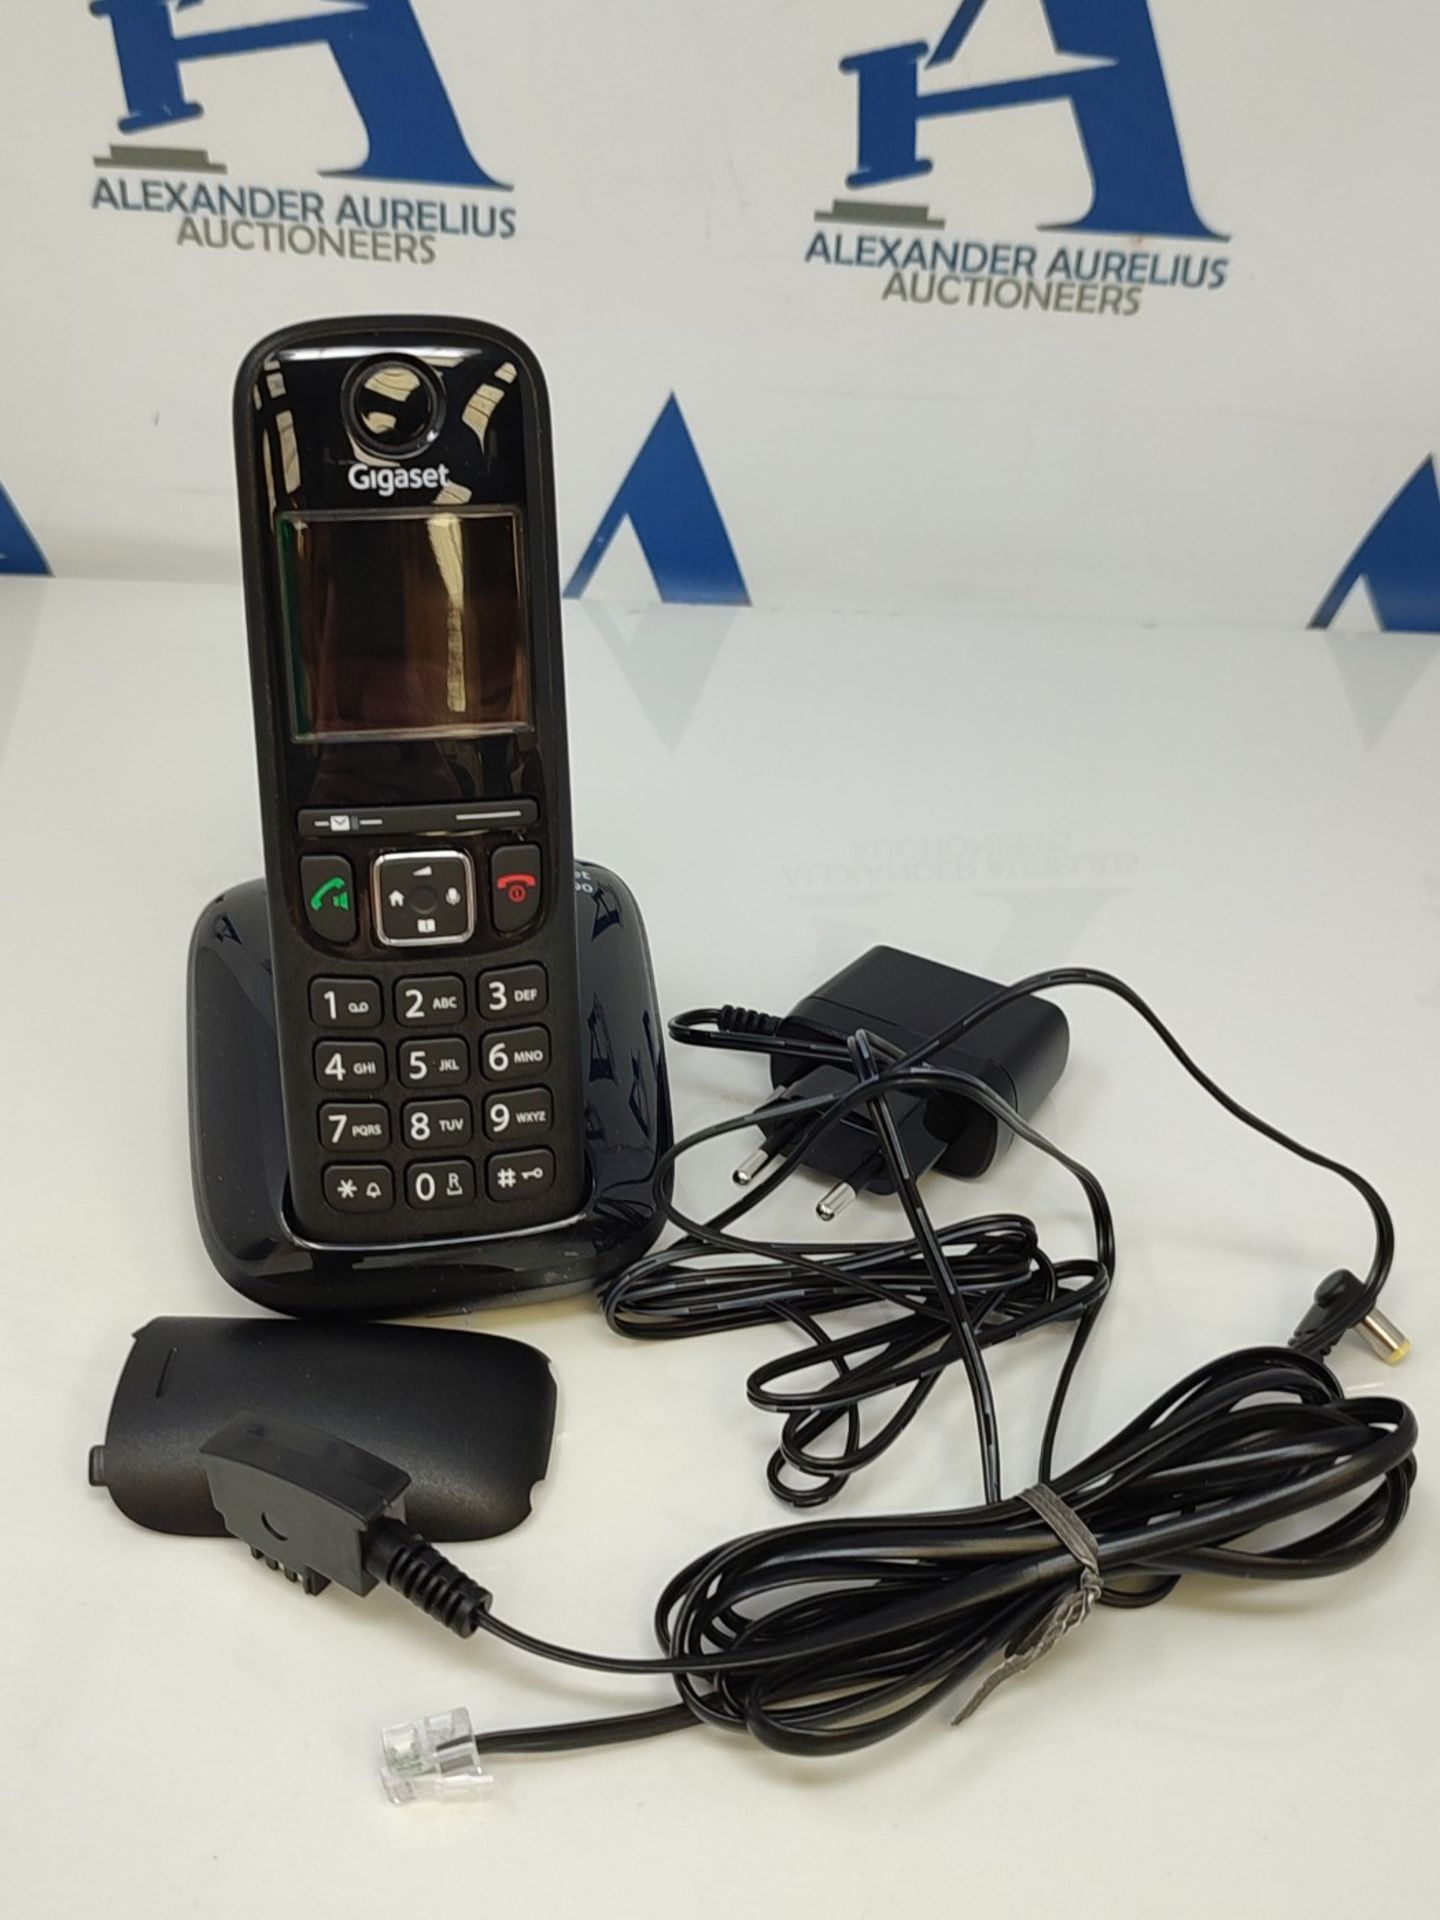 Gigaset AS690 - Cordless DECT Telephone - large, high-contrast display - brilliant aud - Image 4 of 4